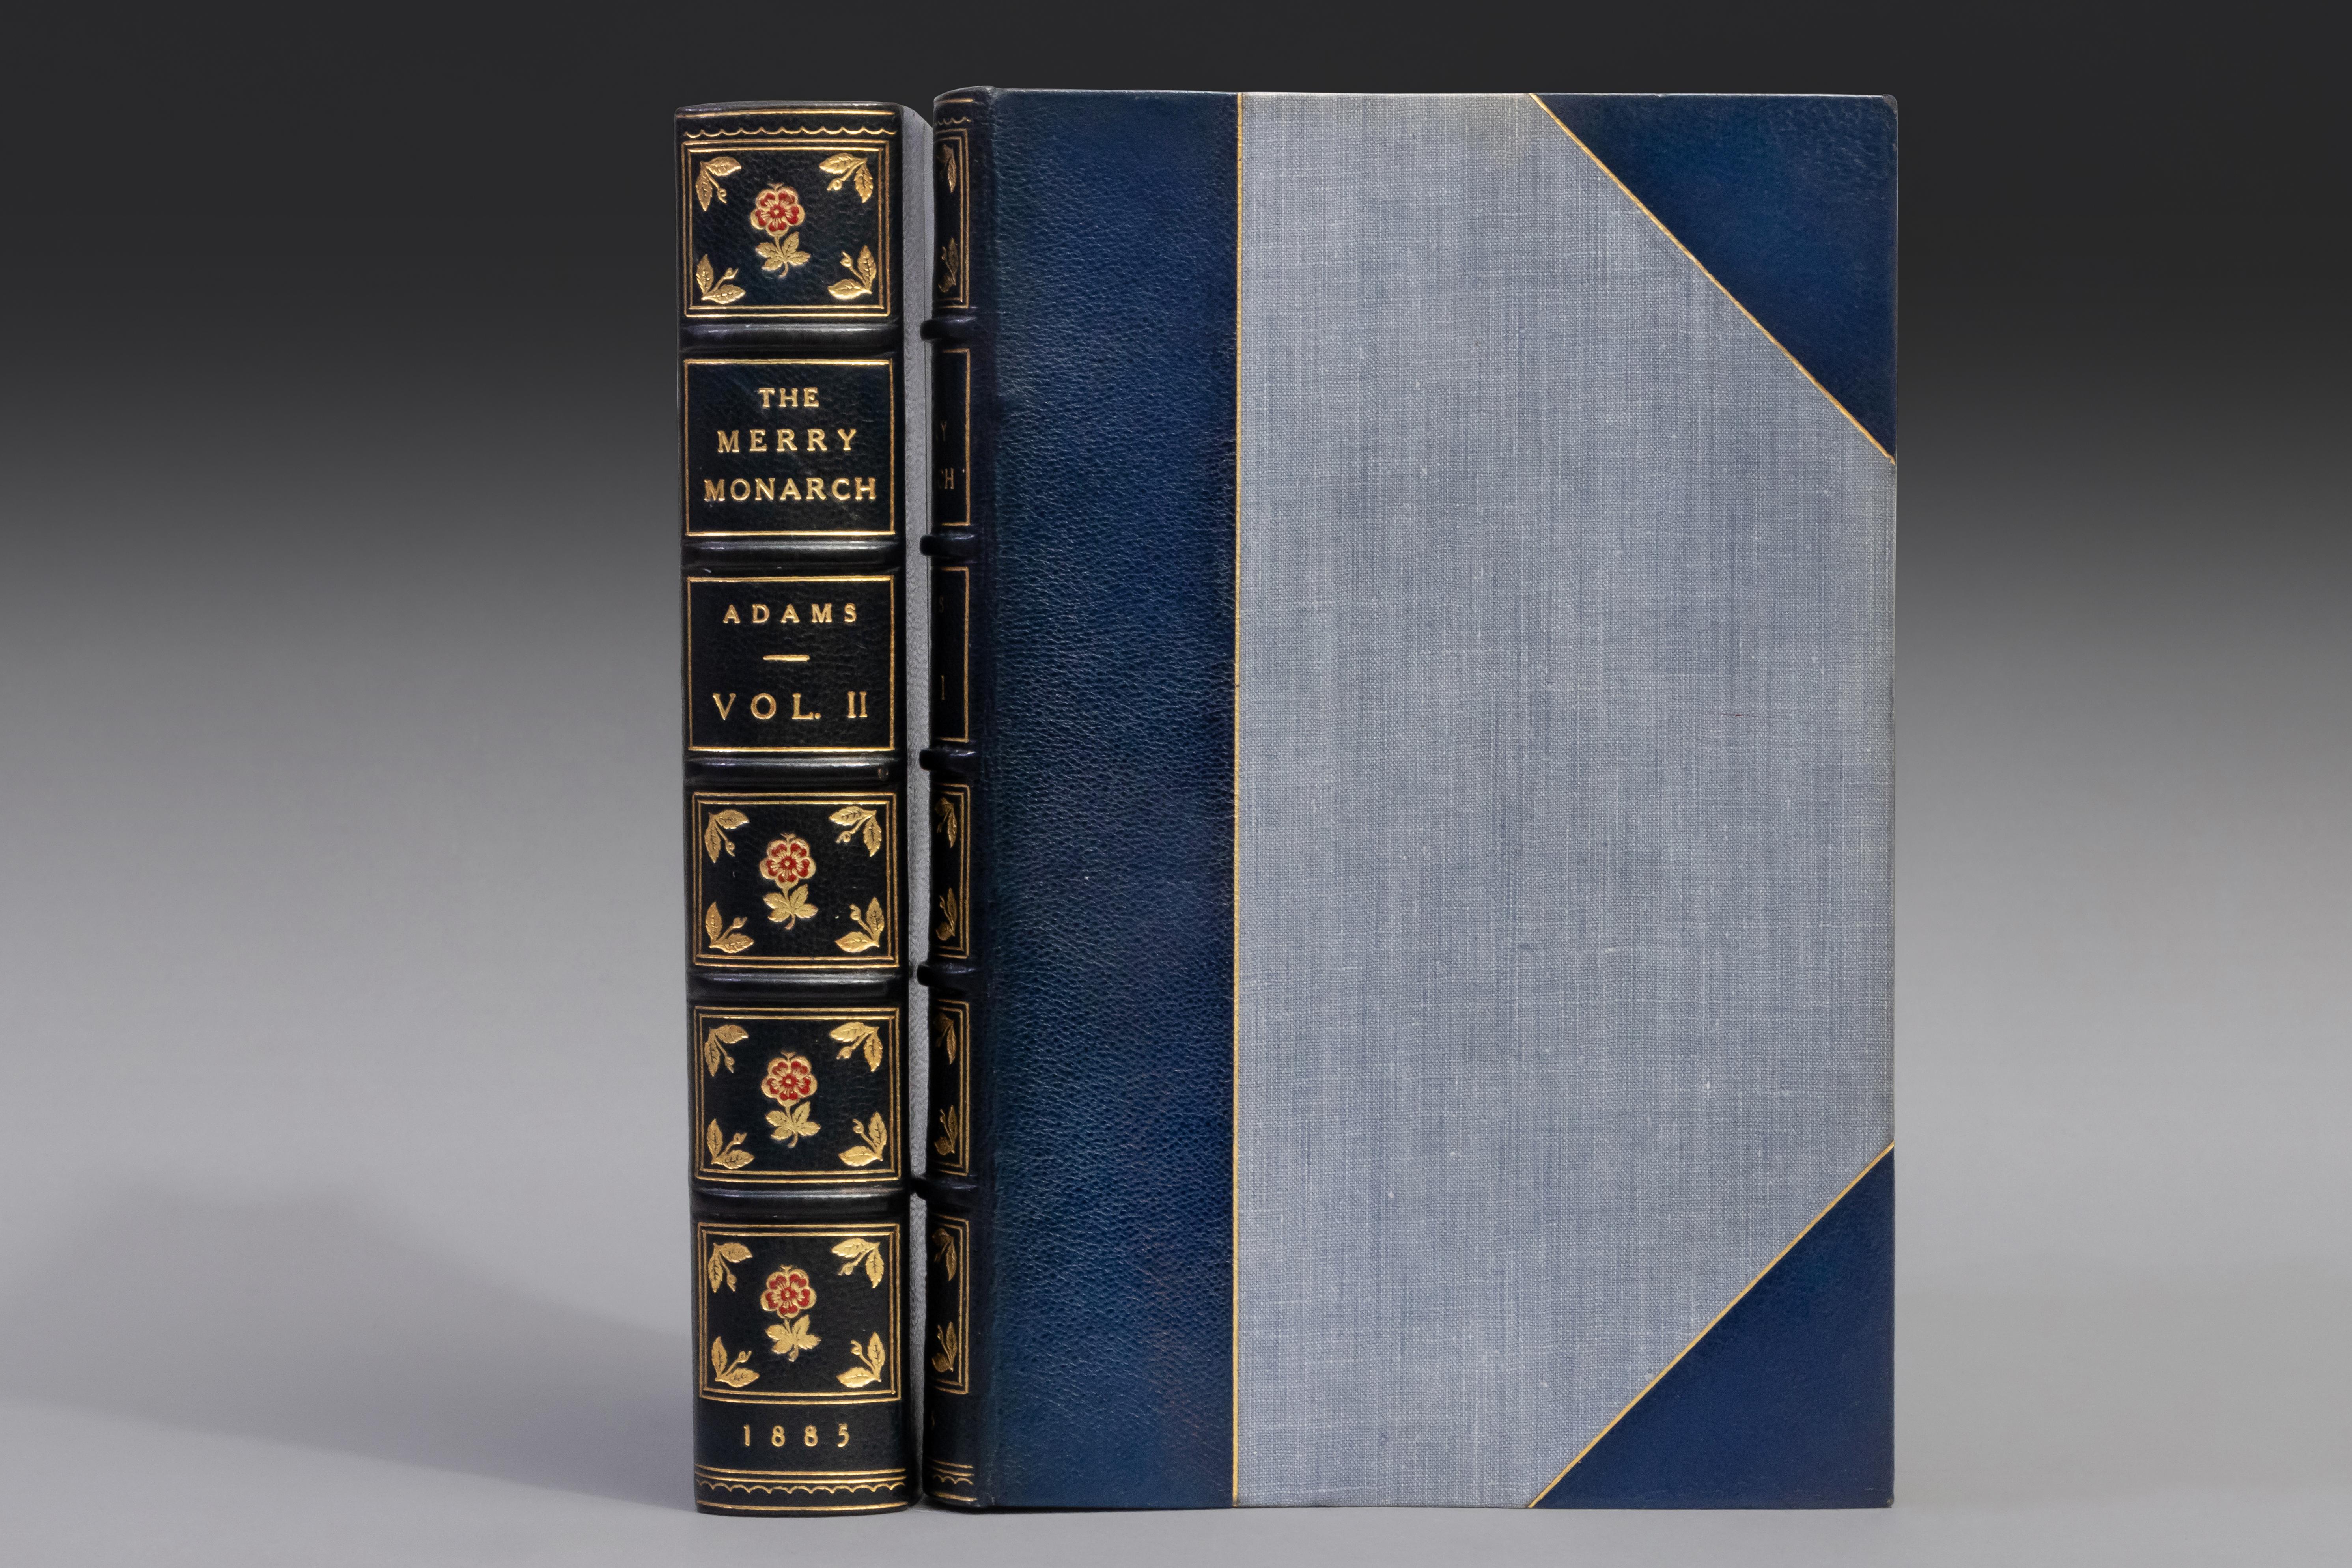 2 Volumes. W.H. Davenport Adams, The Merry Monarch; or, England Under Charles II. Bound in 3/4 blue morocco by Stikeman & Co. Morocco booklabel and large bookplate of Henry Clay Frick. Top edges gilt. Raised bands. Red morocco inlays on spine.